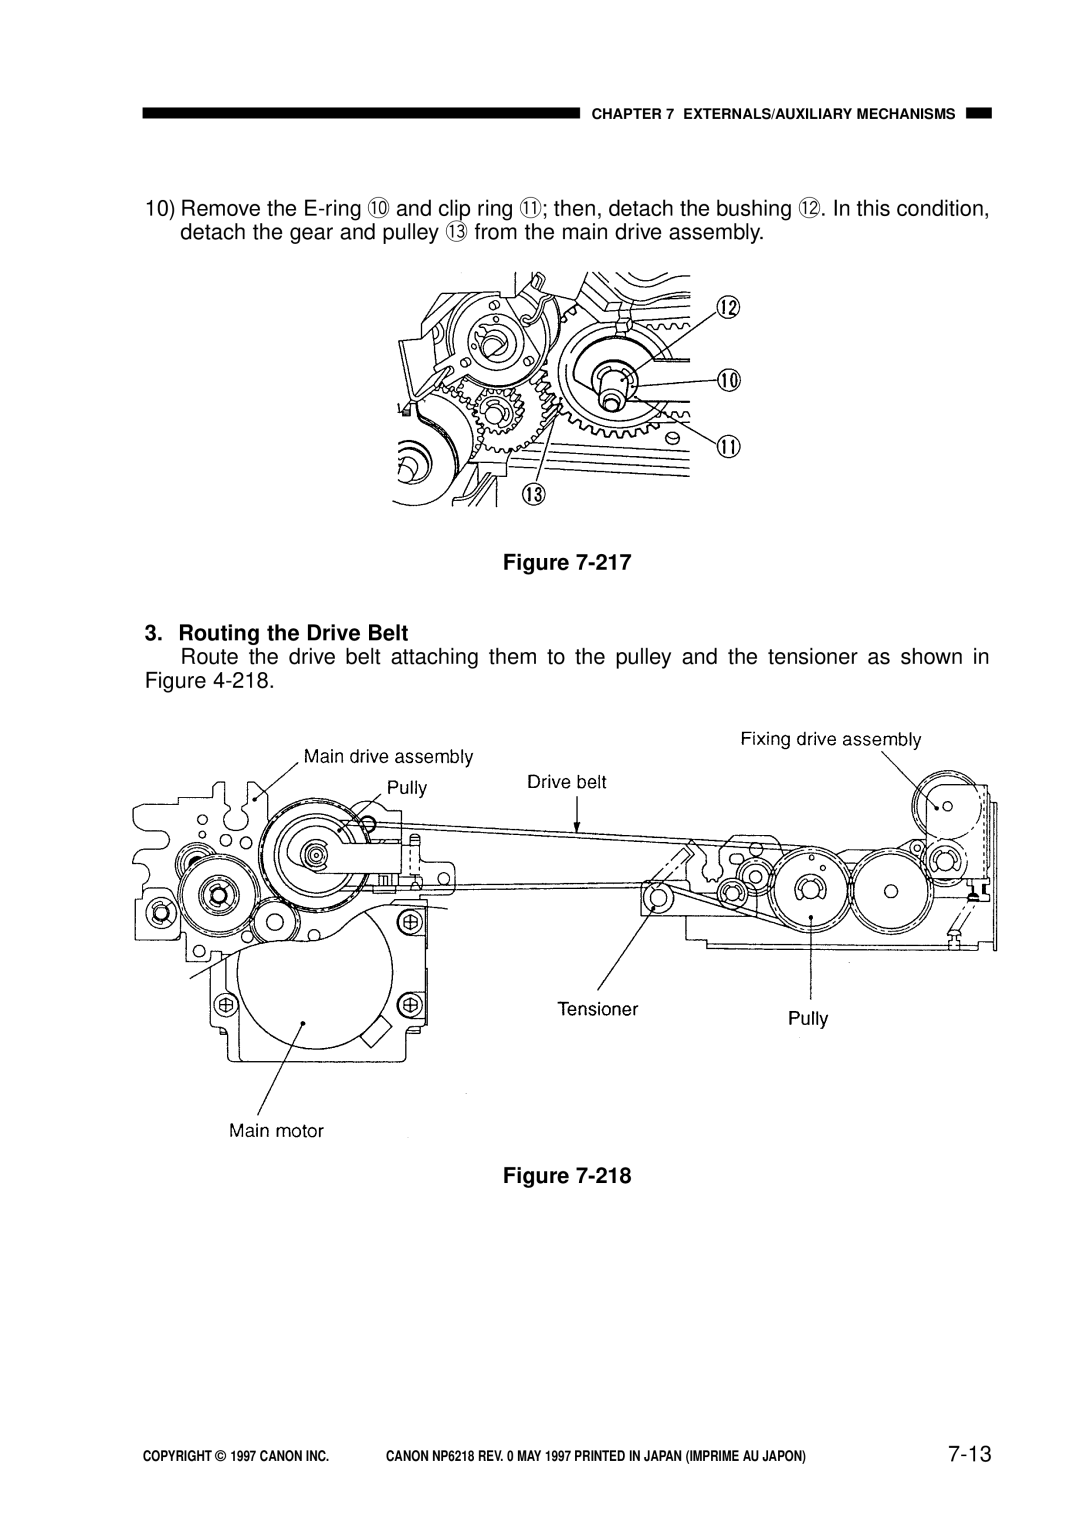 Canon NP6218, FY8-13EX-000 service manual Routing the Drive Belt, 7-13 